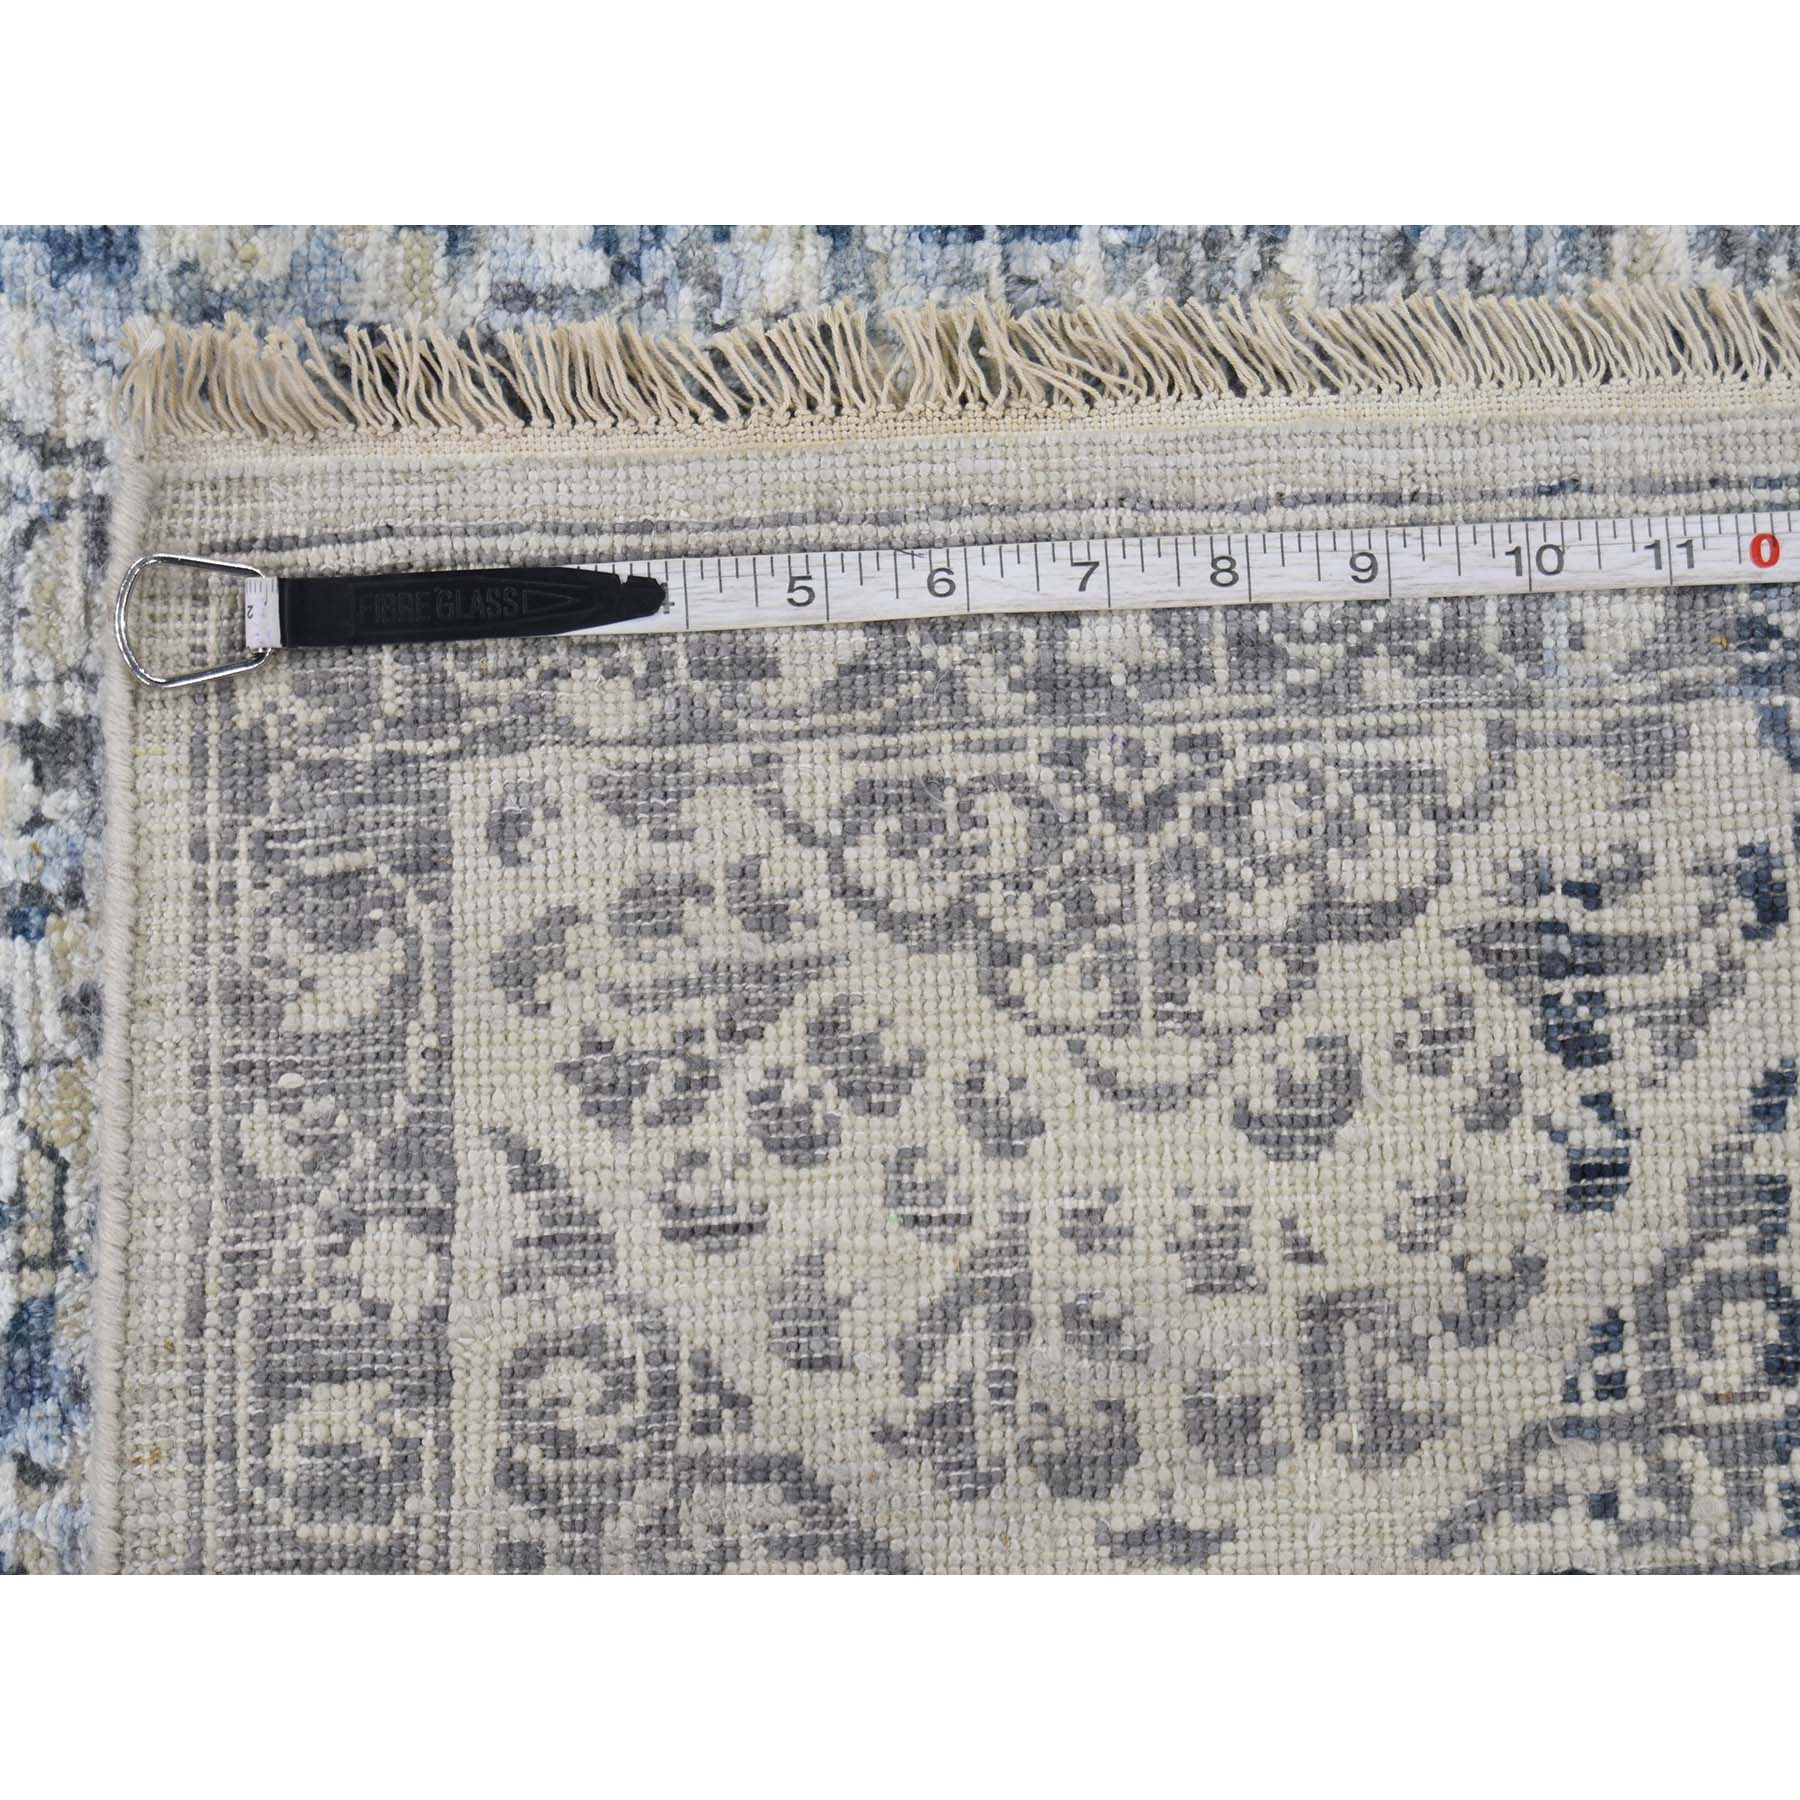 8-3 x10-2  Pure Silk With Textured Wool Vintage Hand Knotted Mamluk Rug 